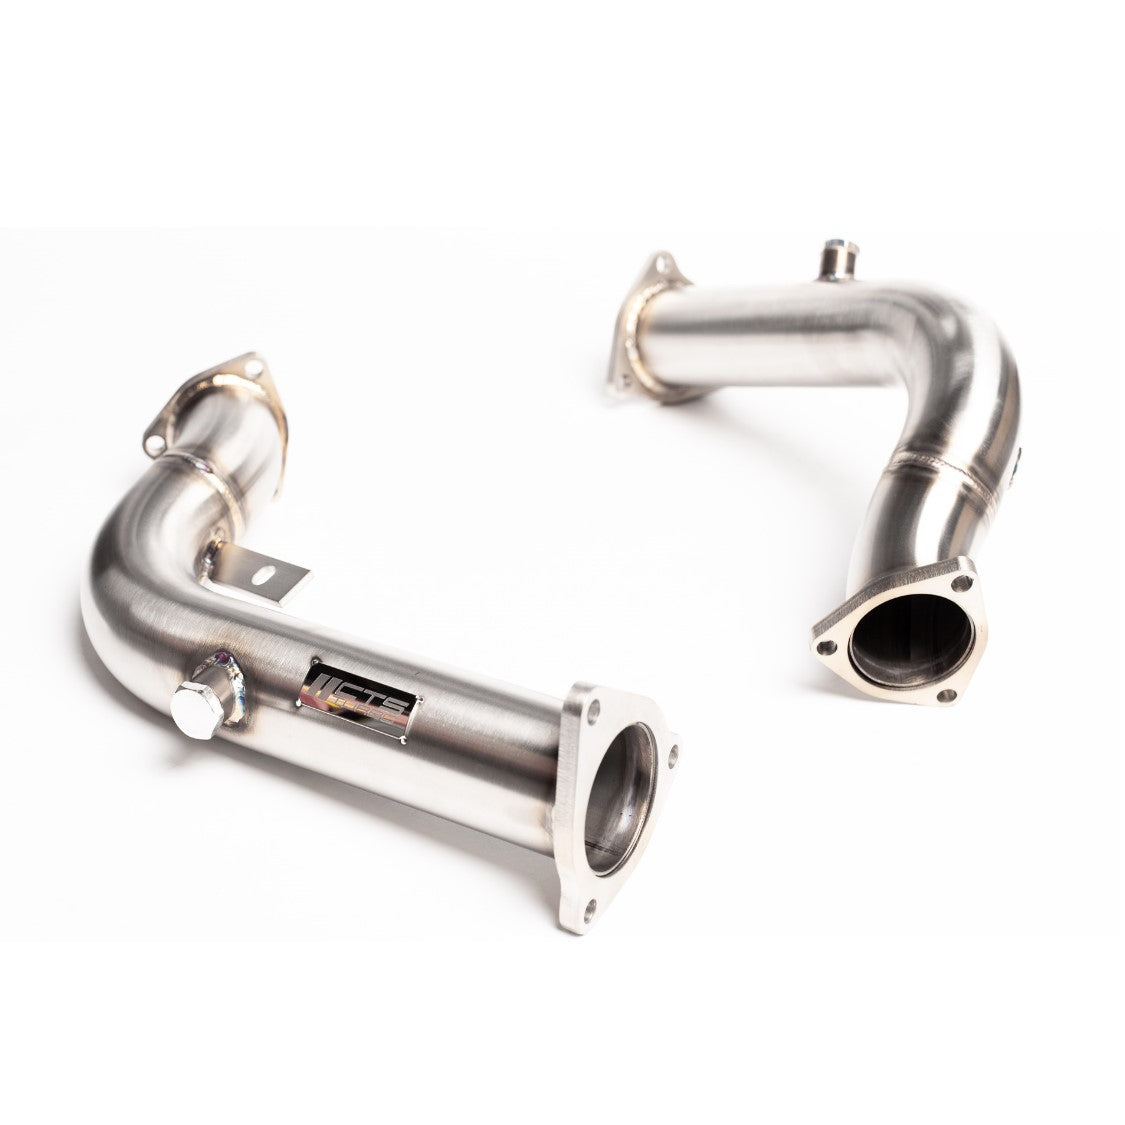 CTS Turbo Audi C7 B8 B8.5 3.0T Supercharged V6 Test Pipes - Pair (Inc. A6, S4, S5 & SQ5) - ML Performance UK